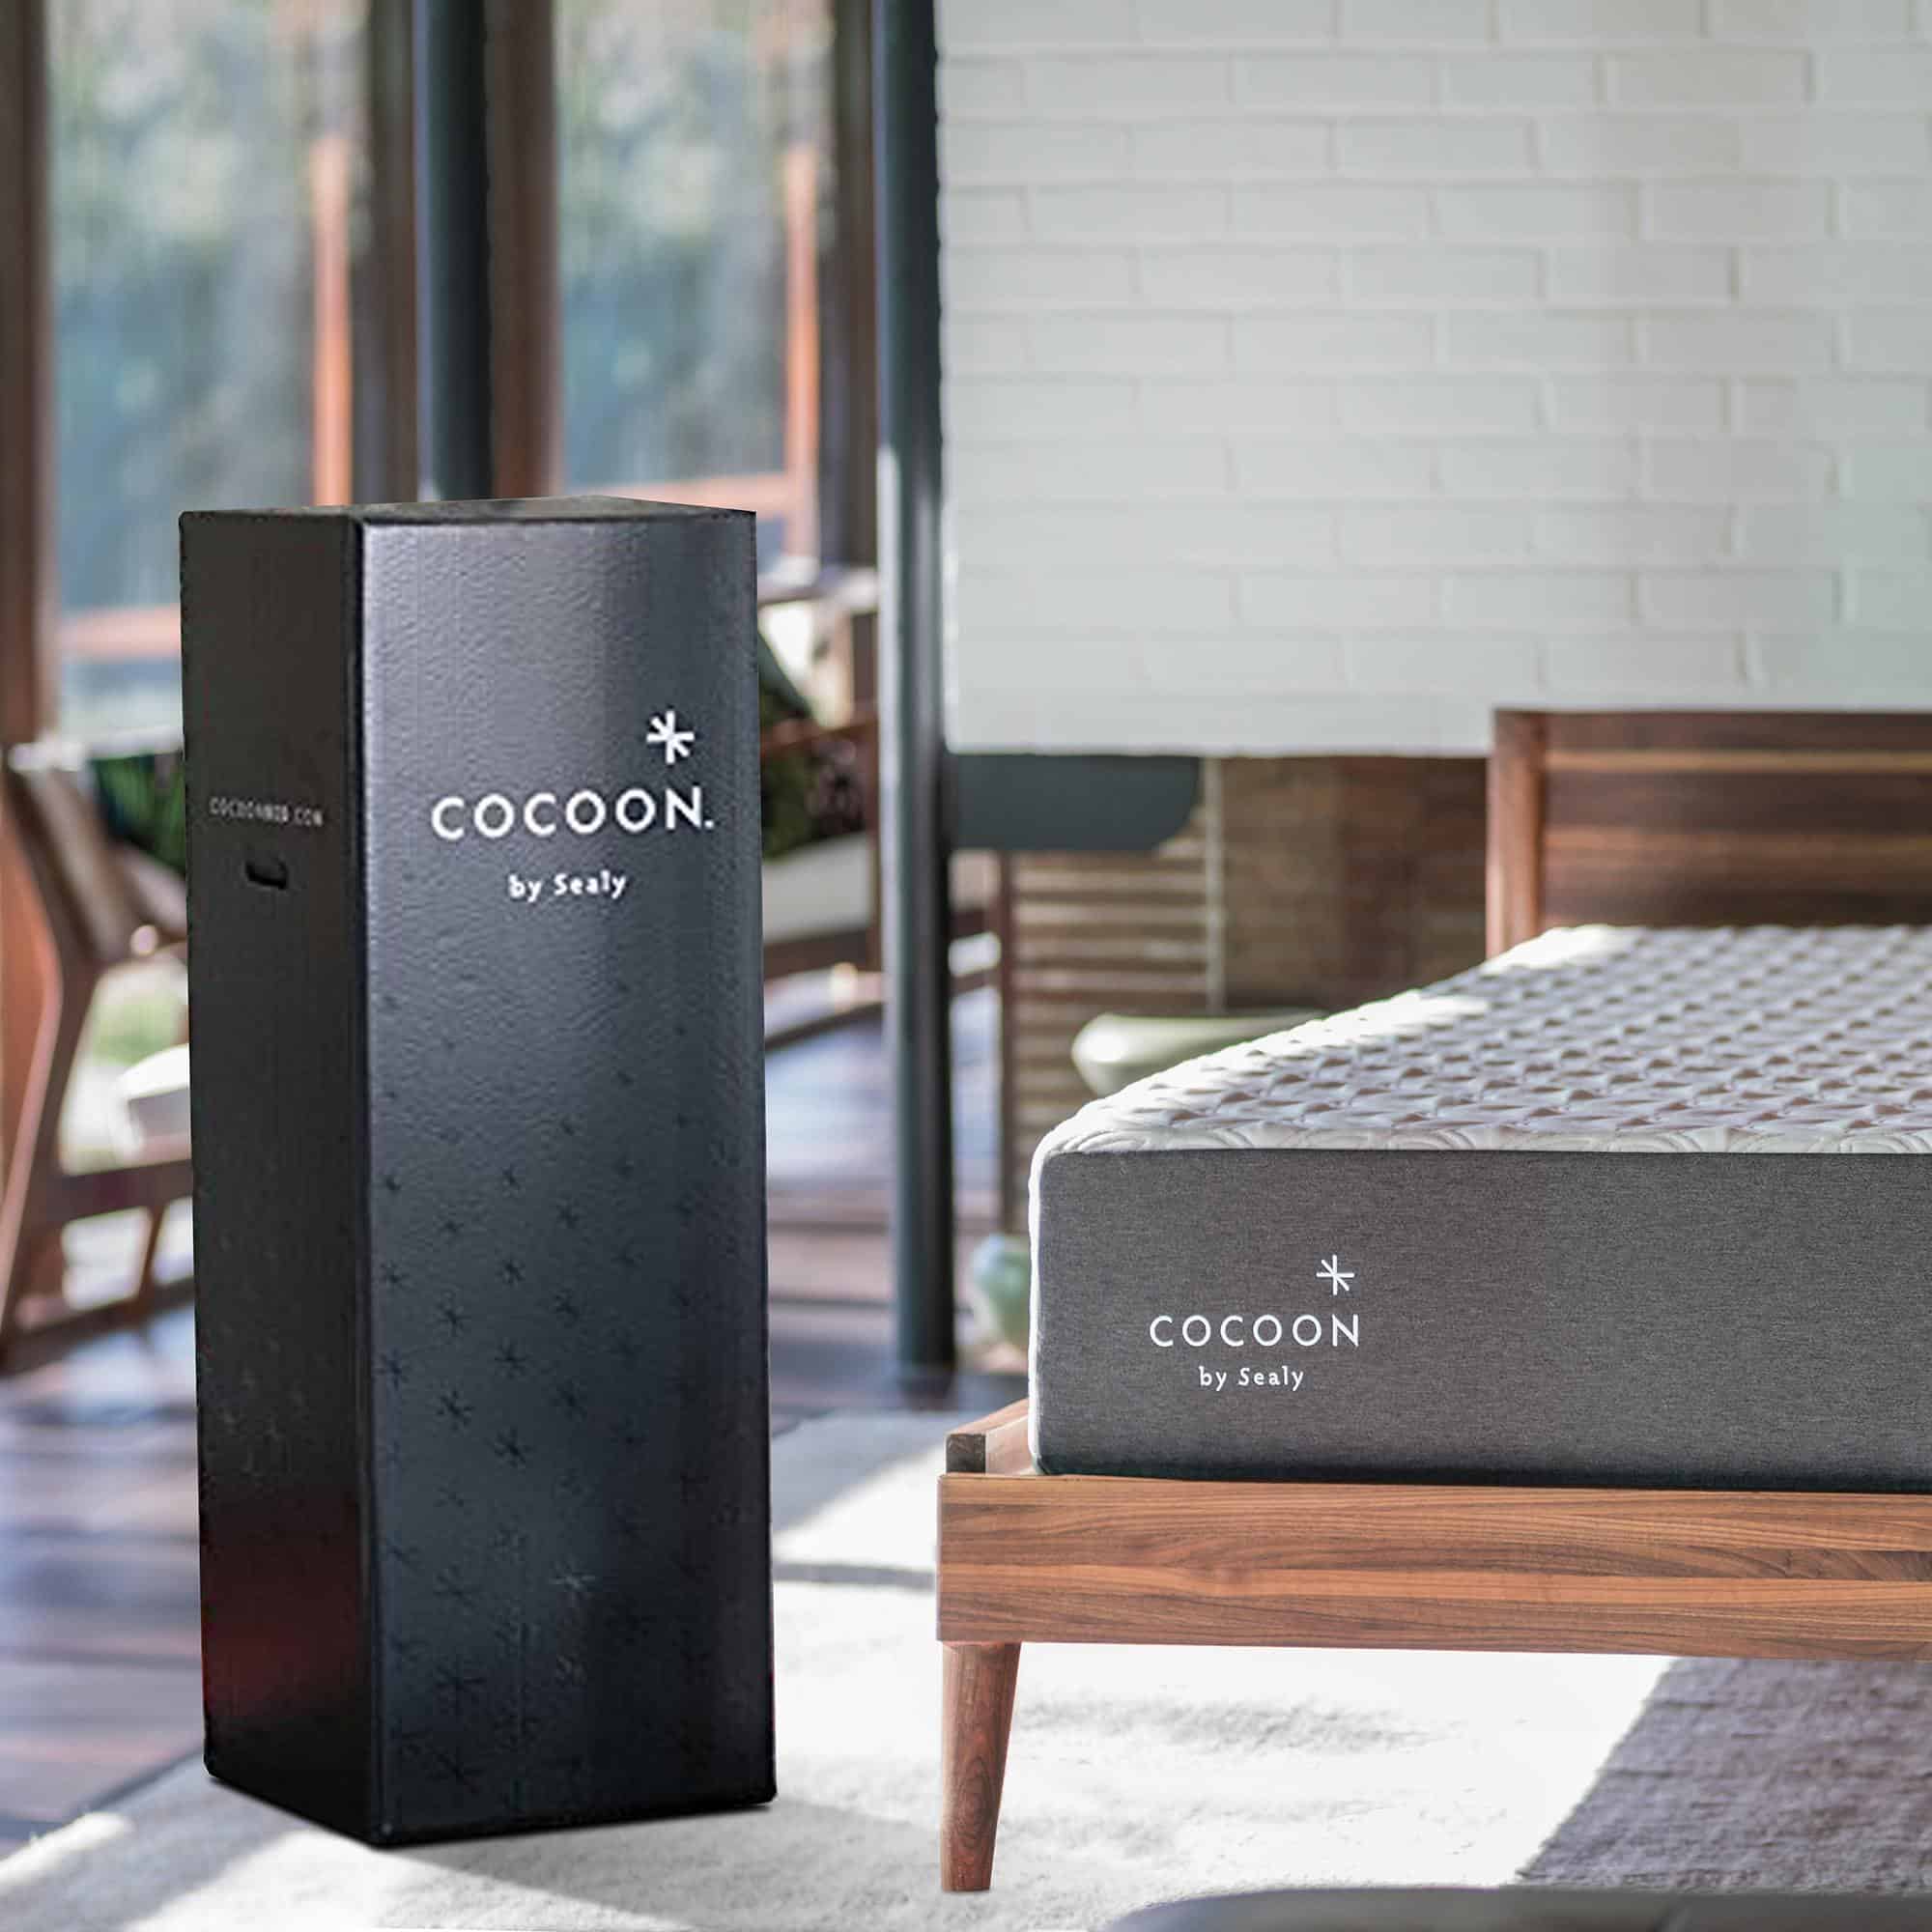 Cocoon by Sealy Review